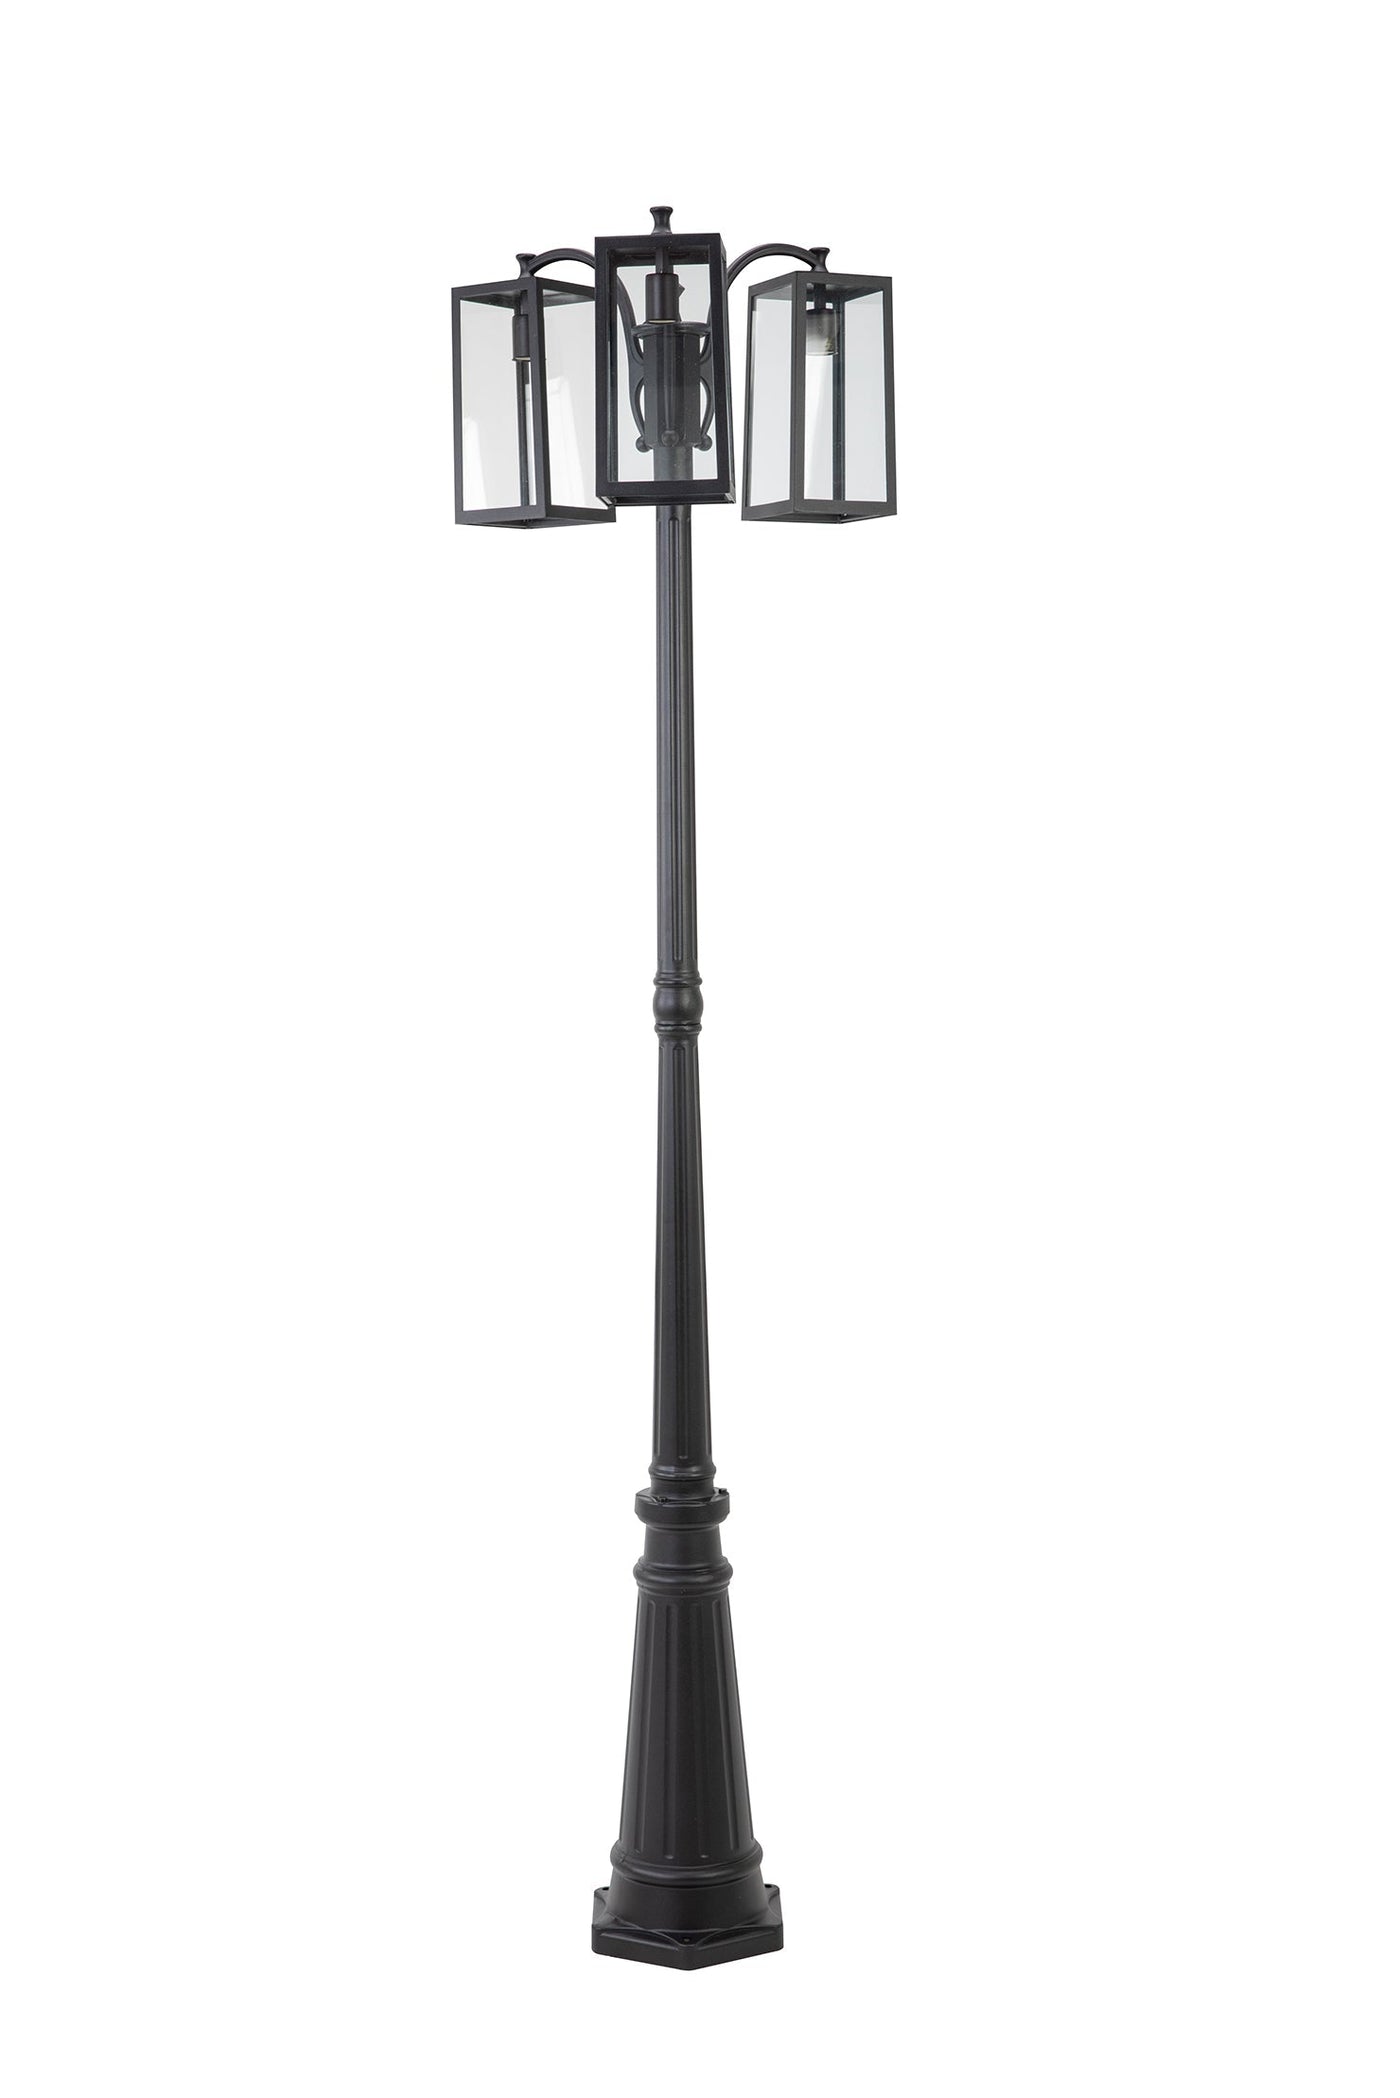 LUTEC-HIGH POST 3-Head Die-Cast Aluminum LED Outdoor Hard Wired Pathway Light (Head & Pole), Black